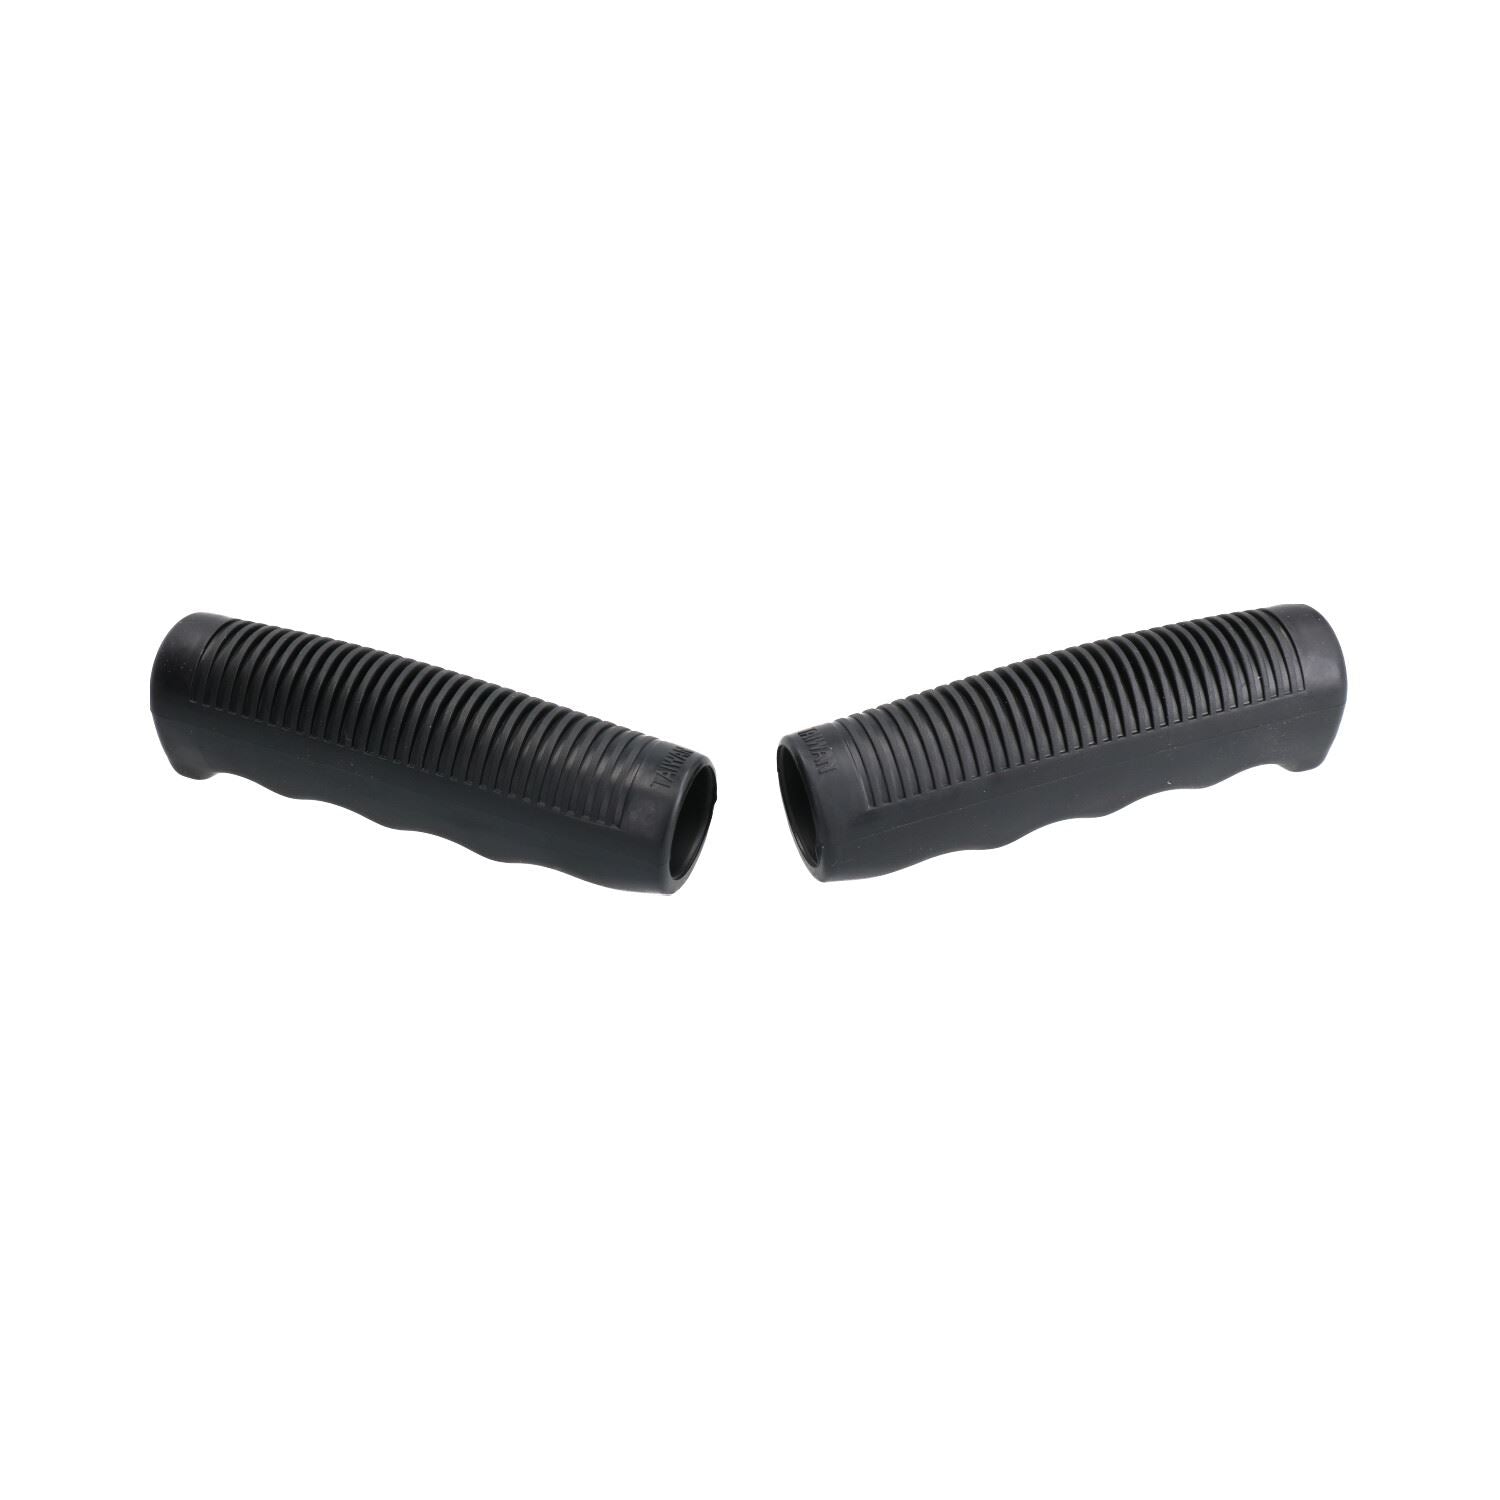 Rubber Handlebar Grips With Finger Groove Mold Cycle Anti-Slip For Most Bikes